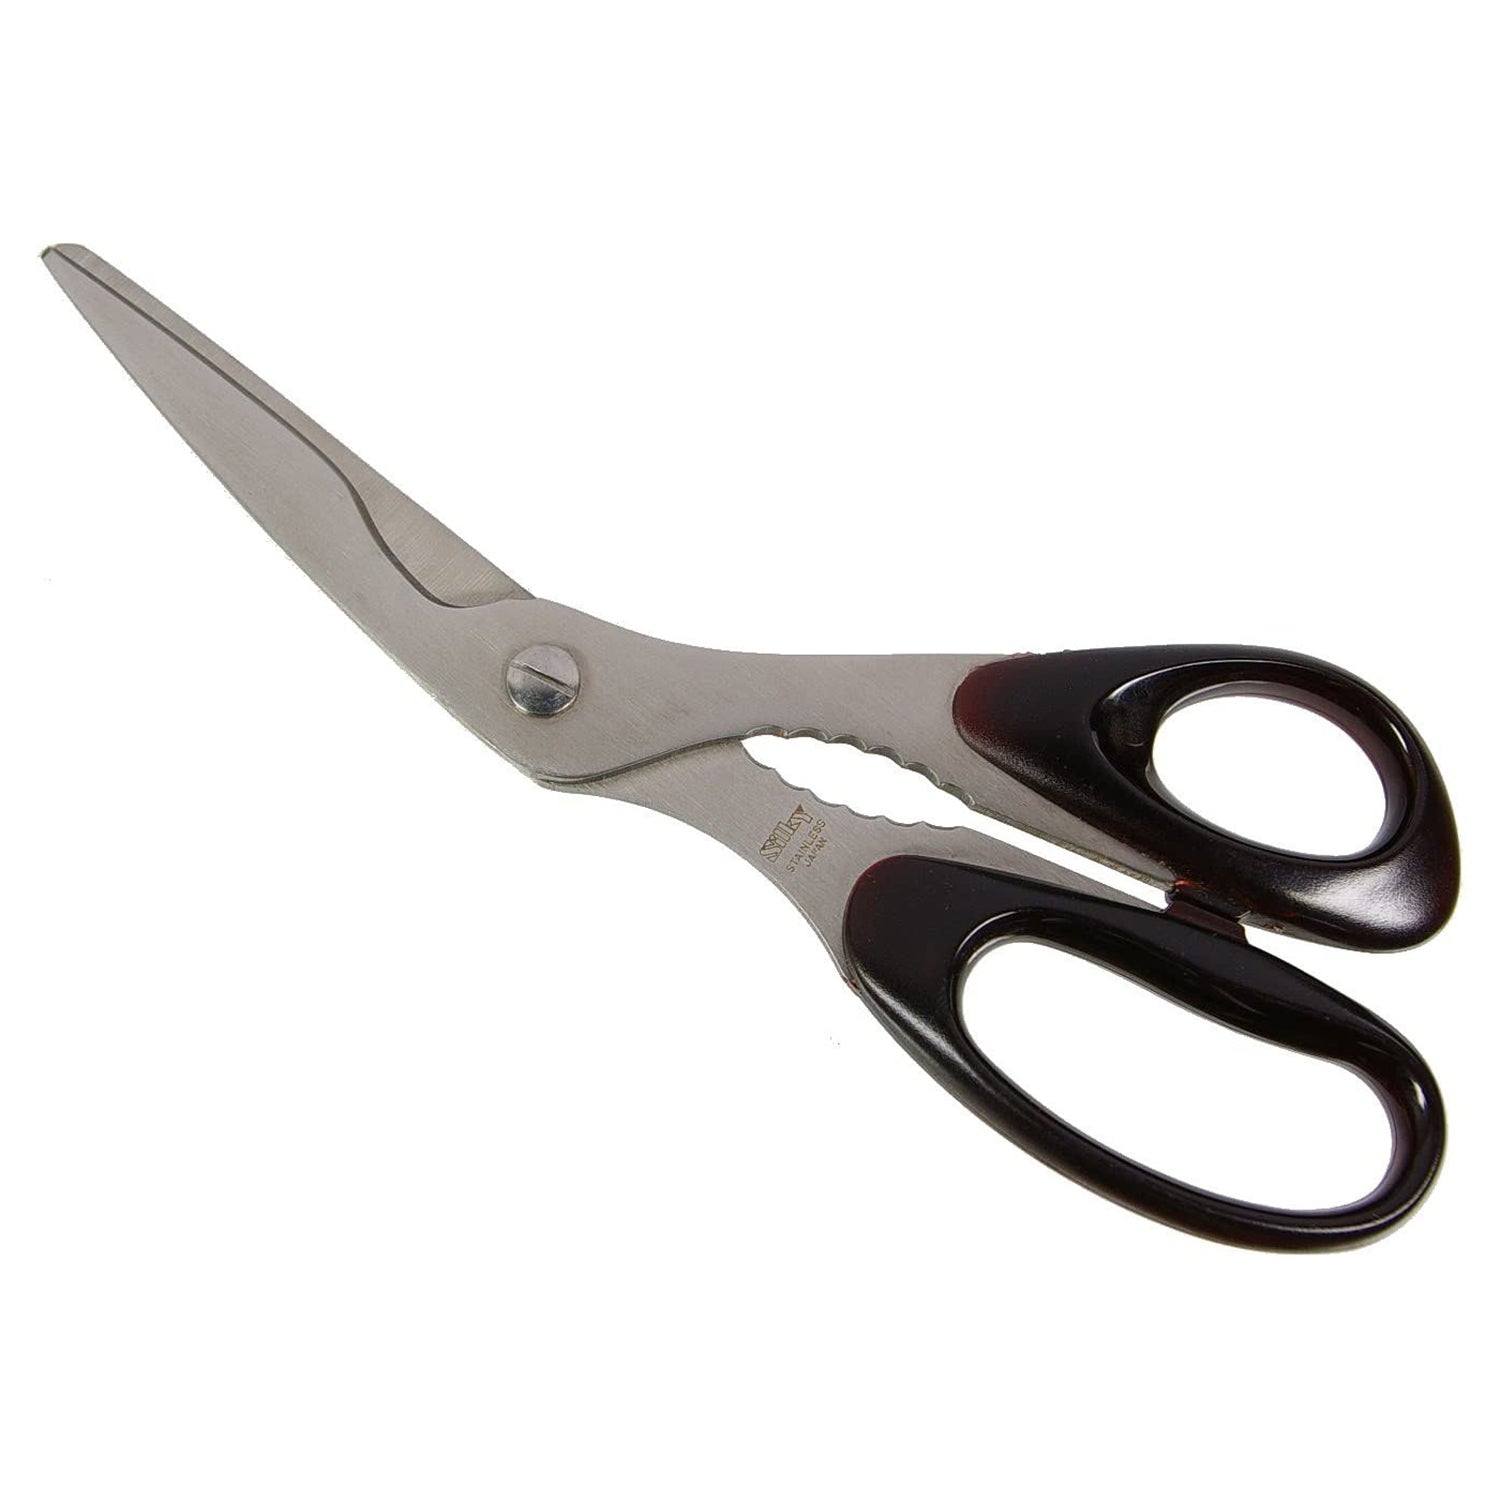 Marusho Silky Stainless Steel Seafood Scissors - Premium Kitchen Tool for Effortless Seafood Preparation